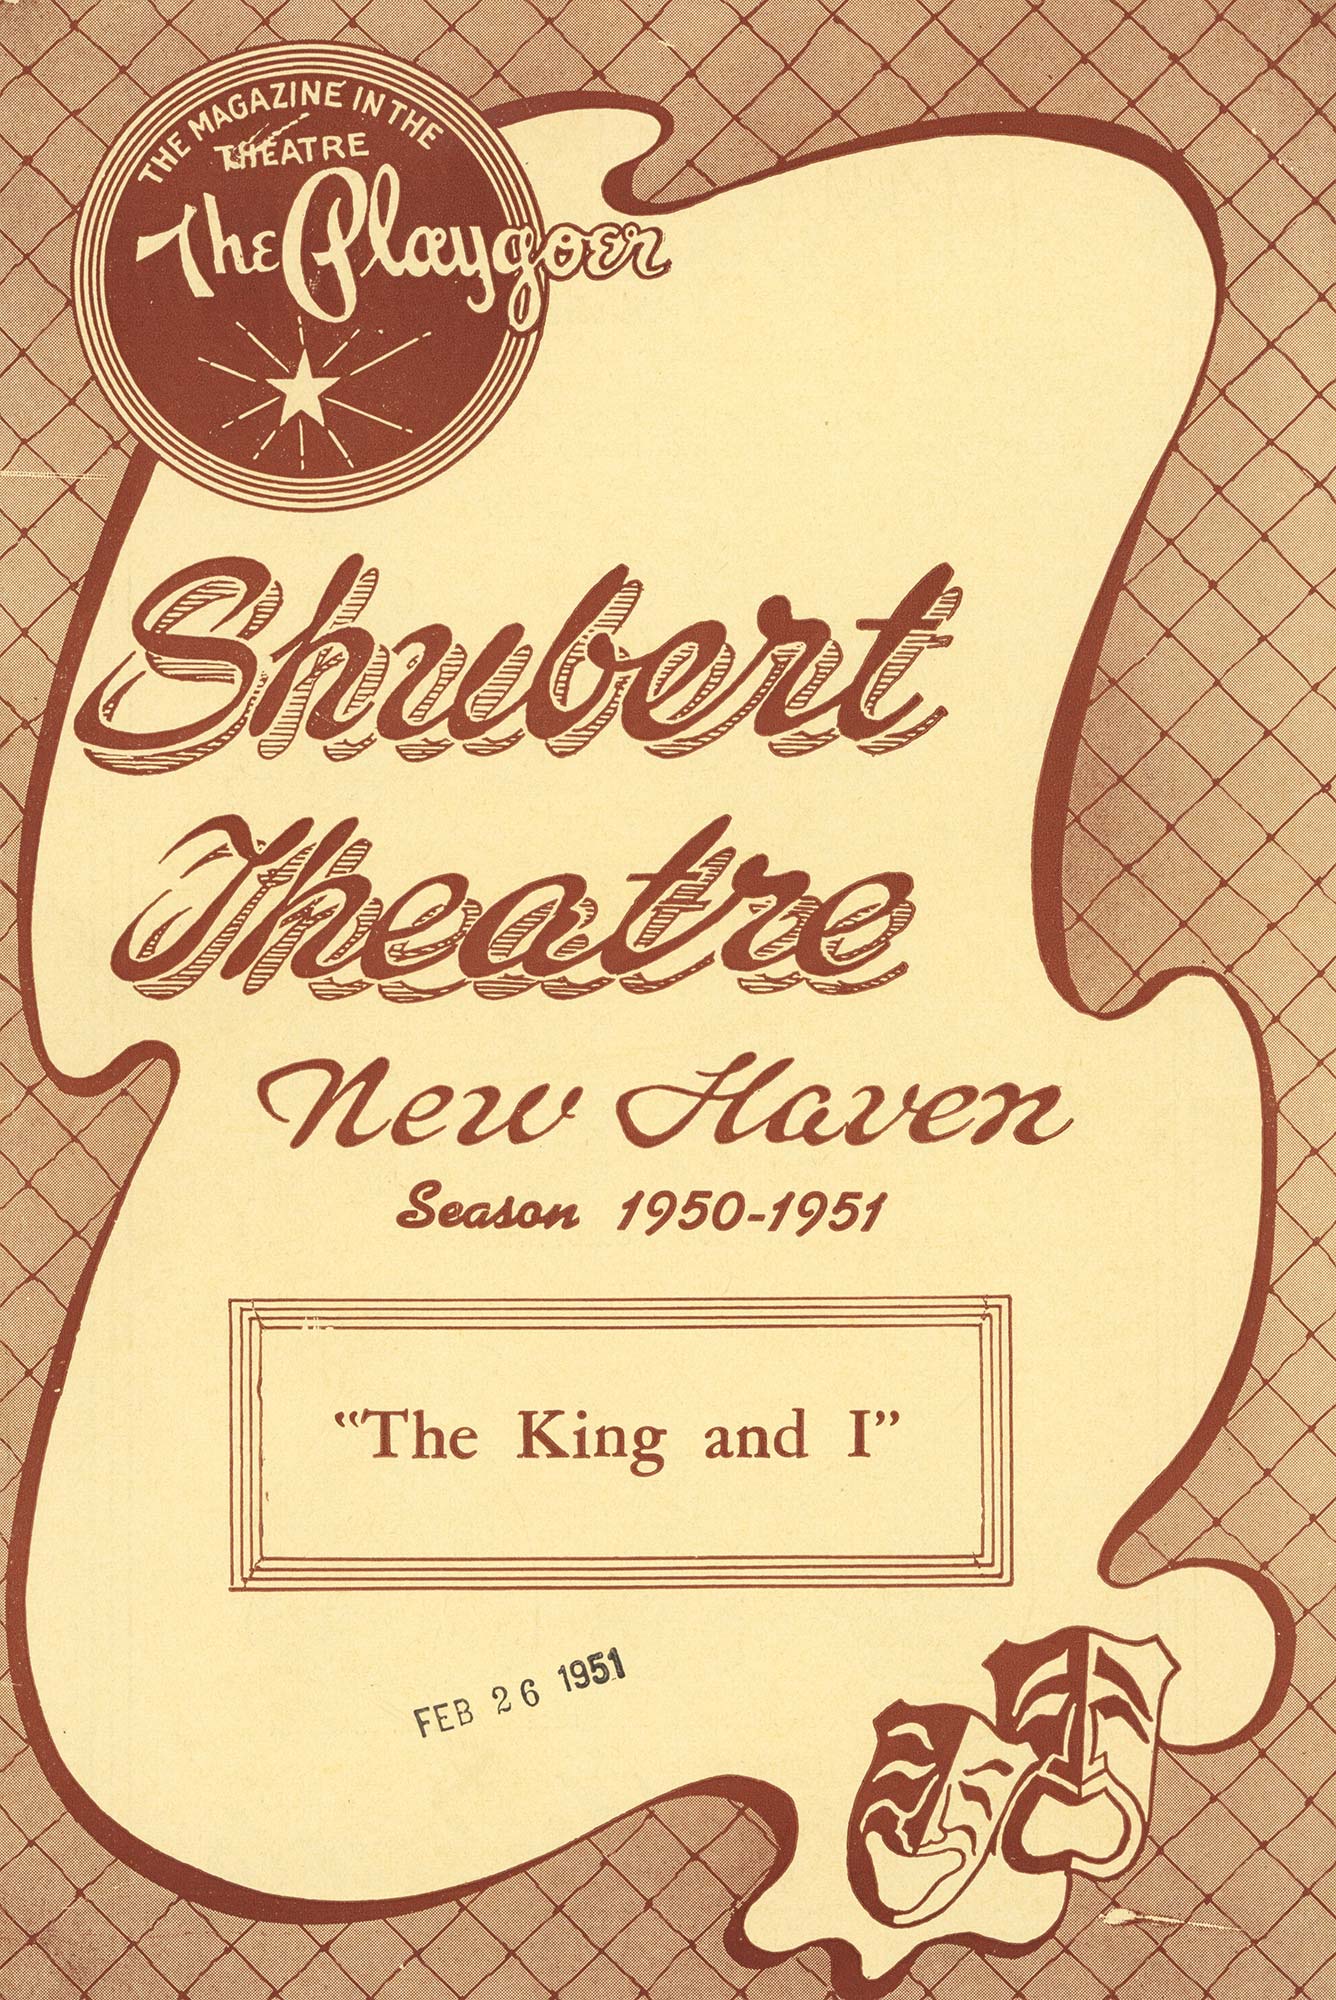 A program from the 1951 world premiere production of The King and I.